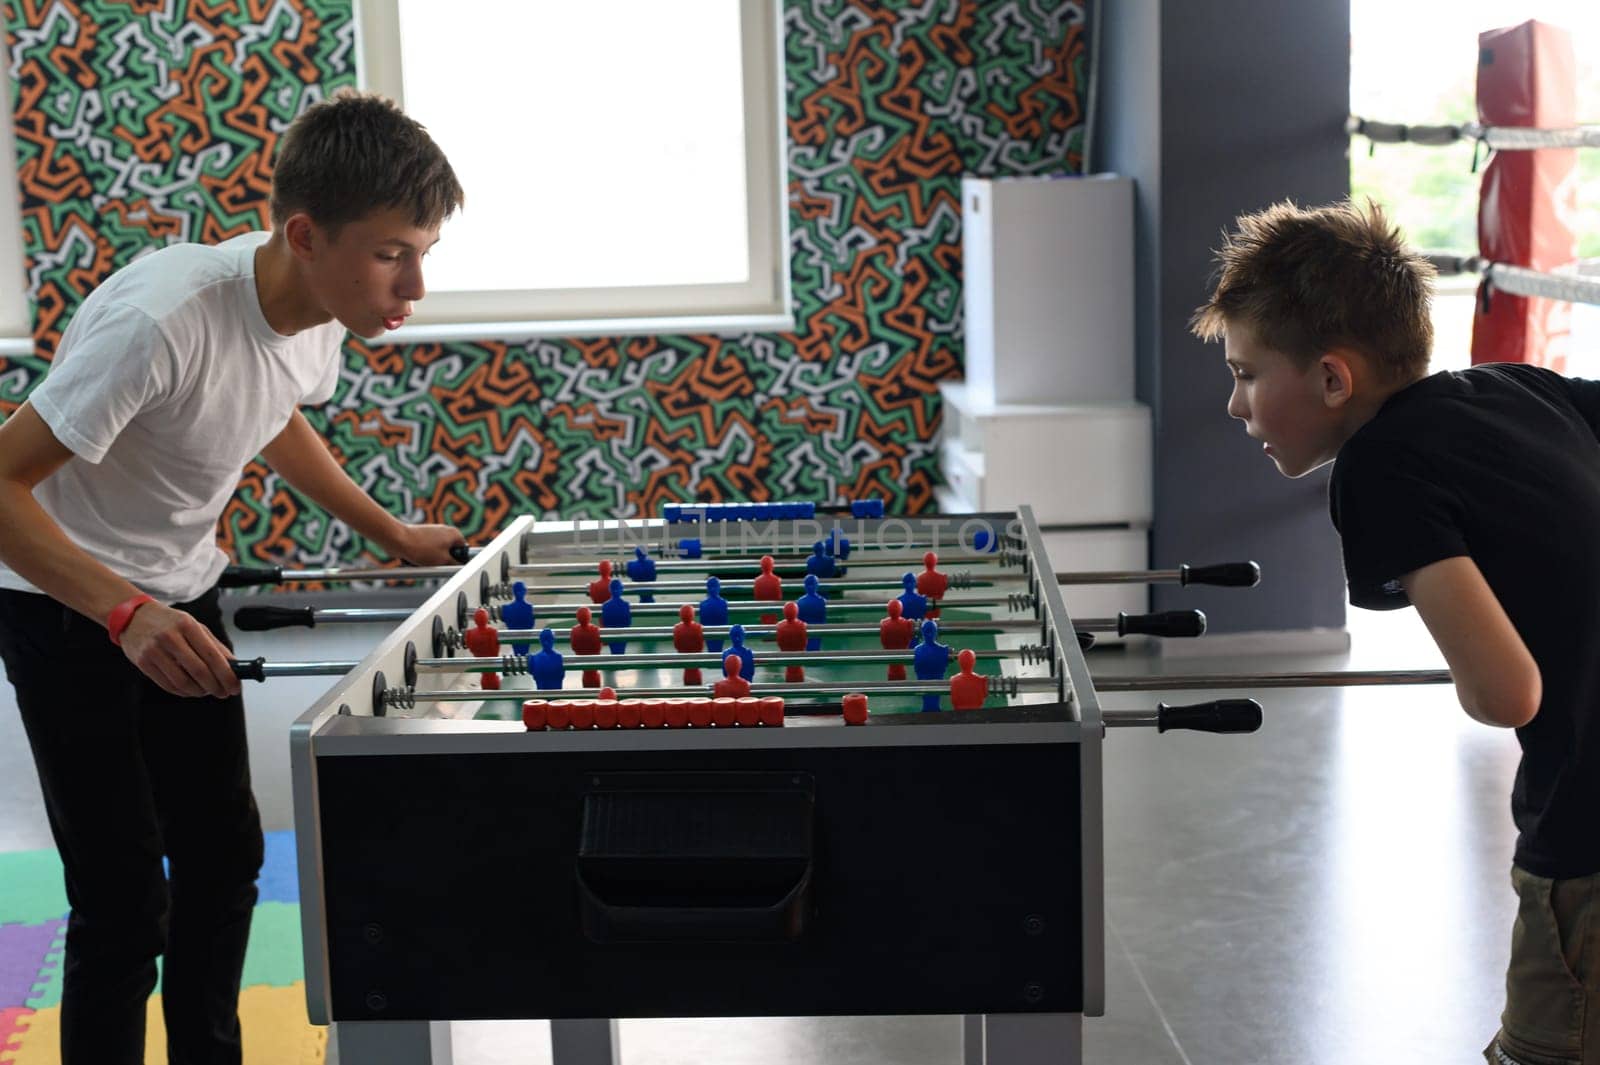 Two boys are playing table football in the playroom by Niko_Cingaryuk